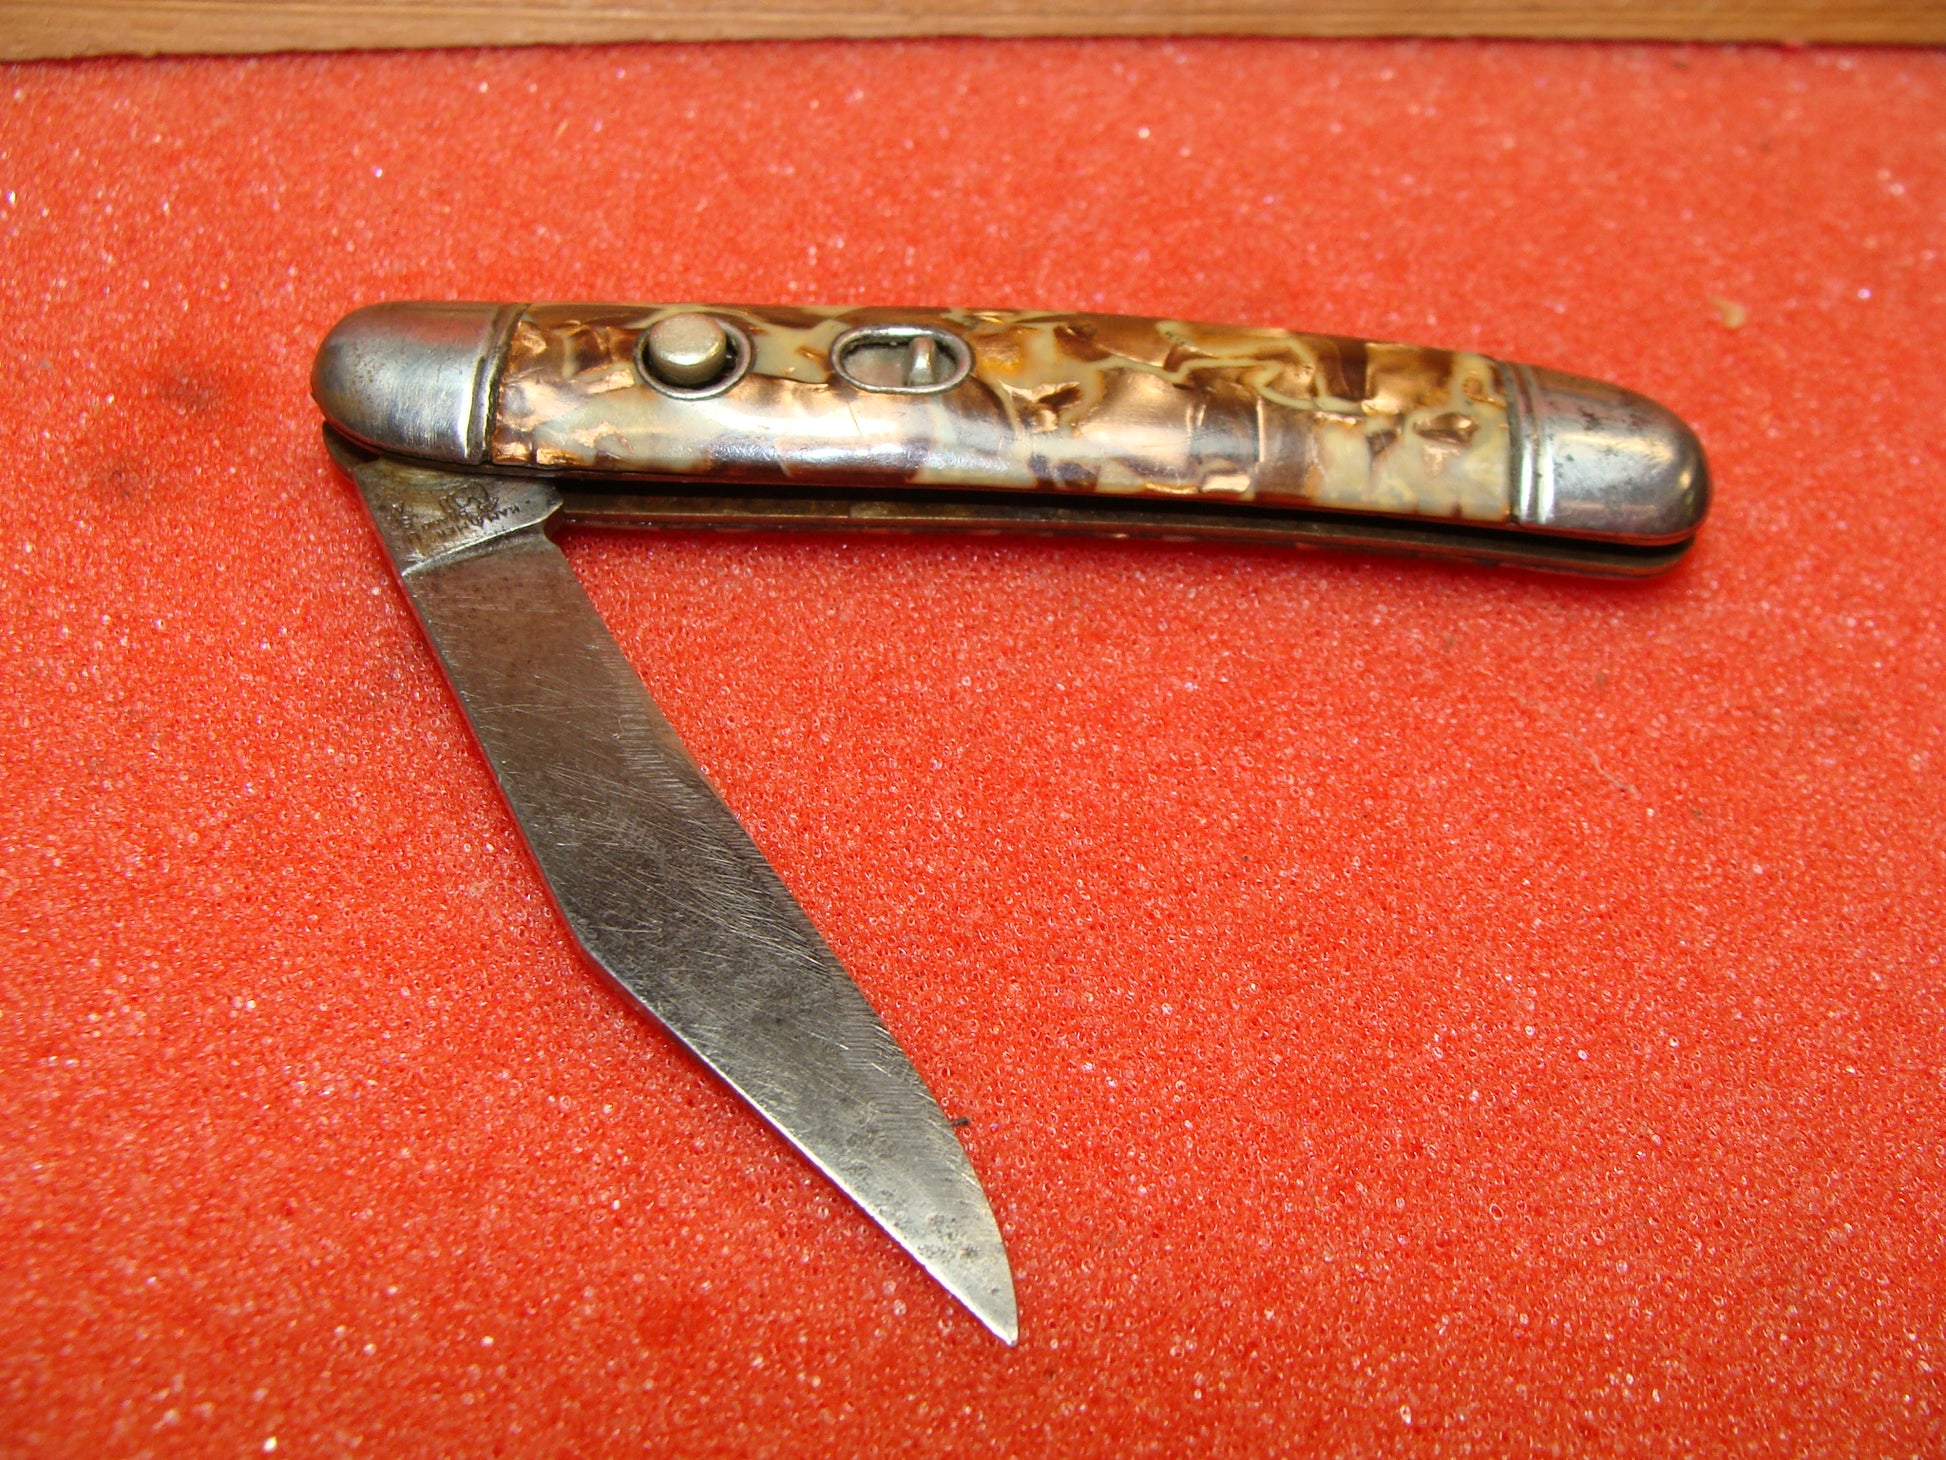 HAMMER BRAND IMPERIAL CUT 1945-55 VINTAGE AMERICAN AUTOMATIC KNIFE